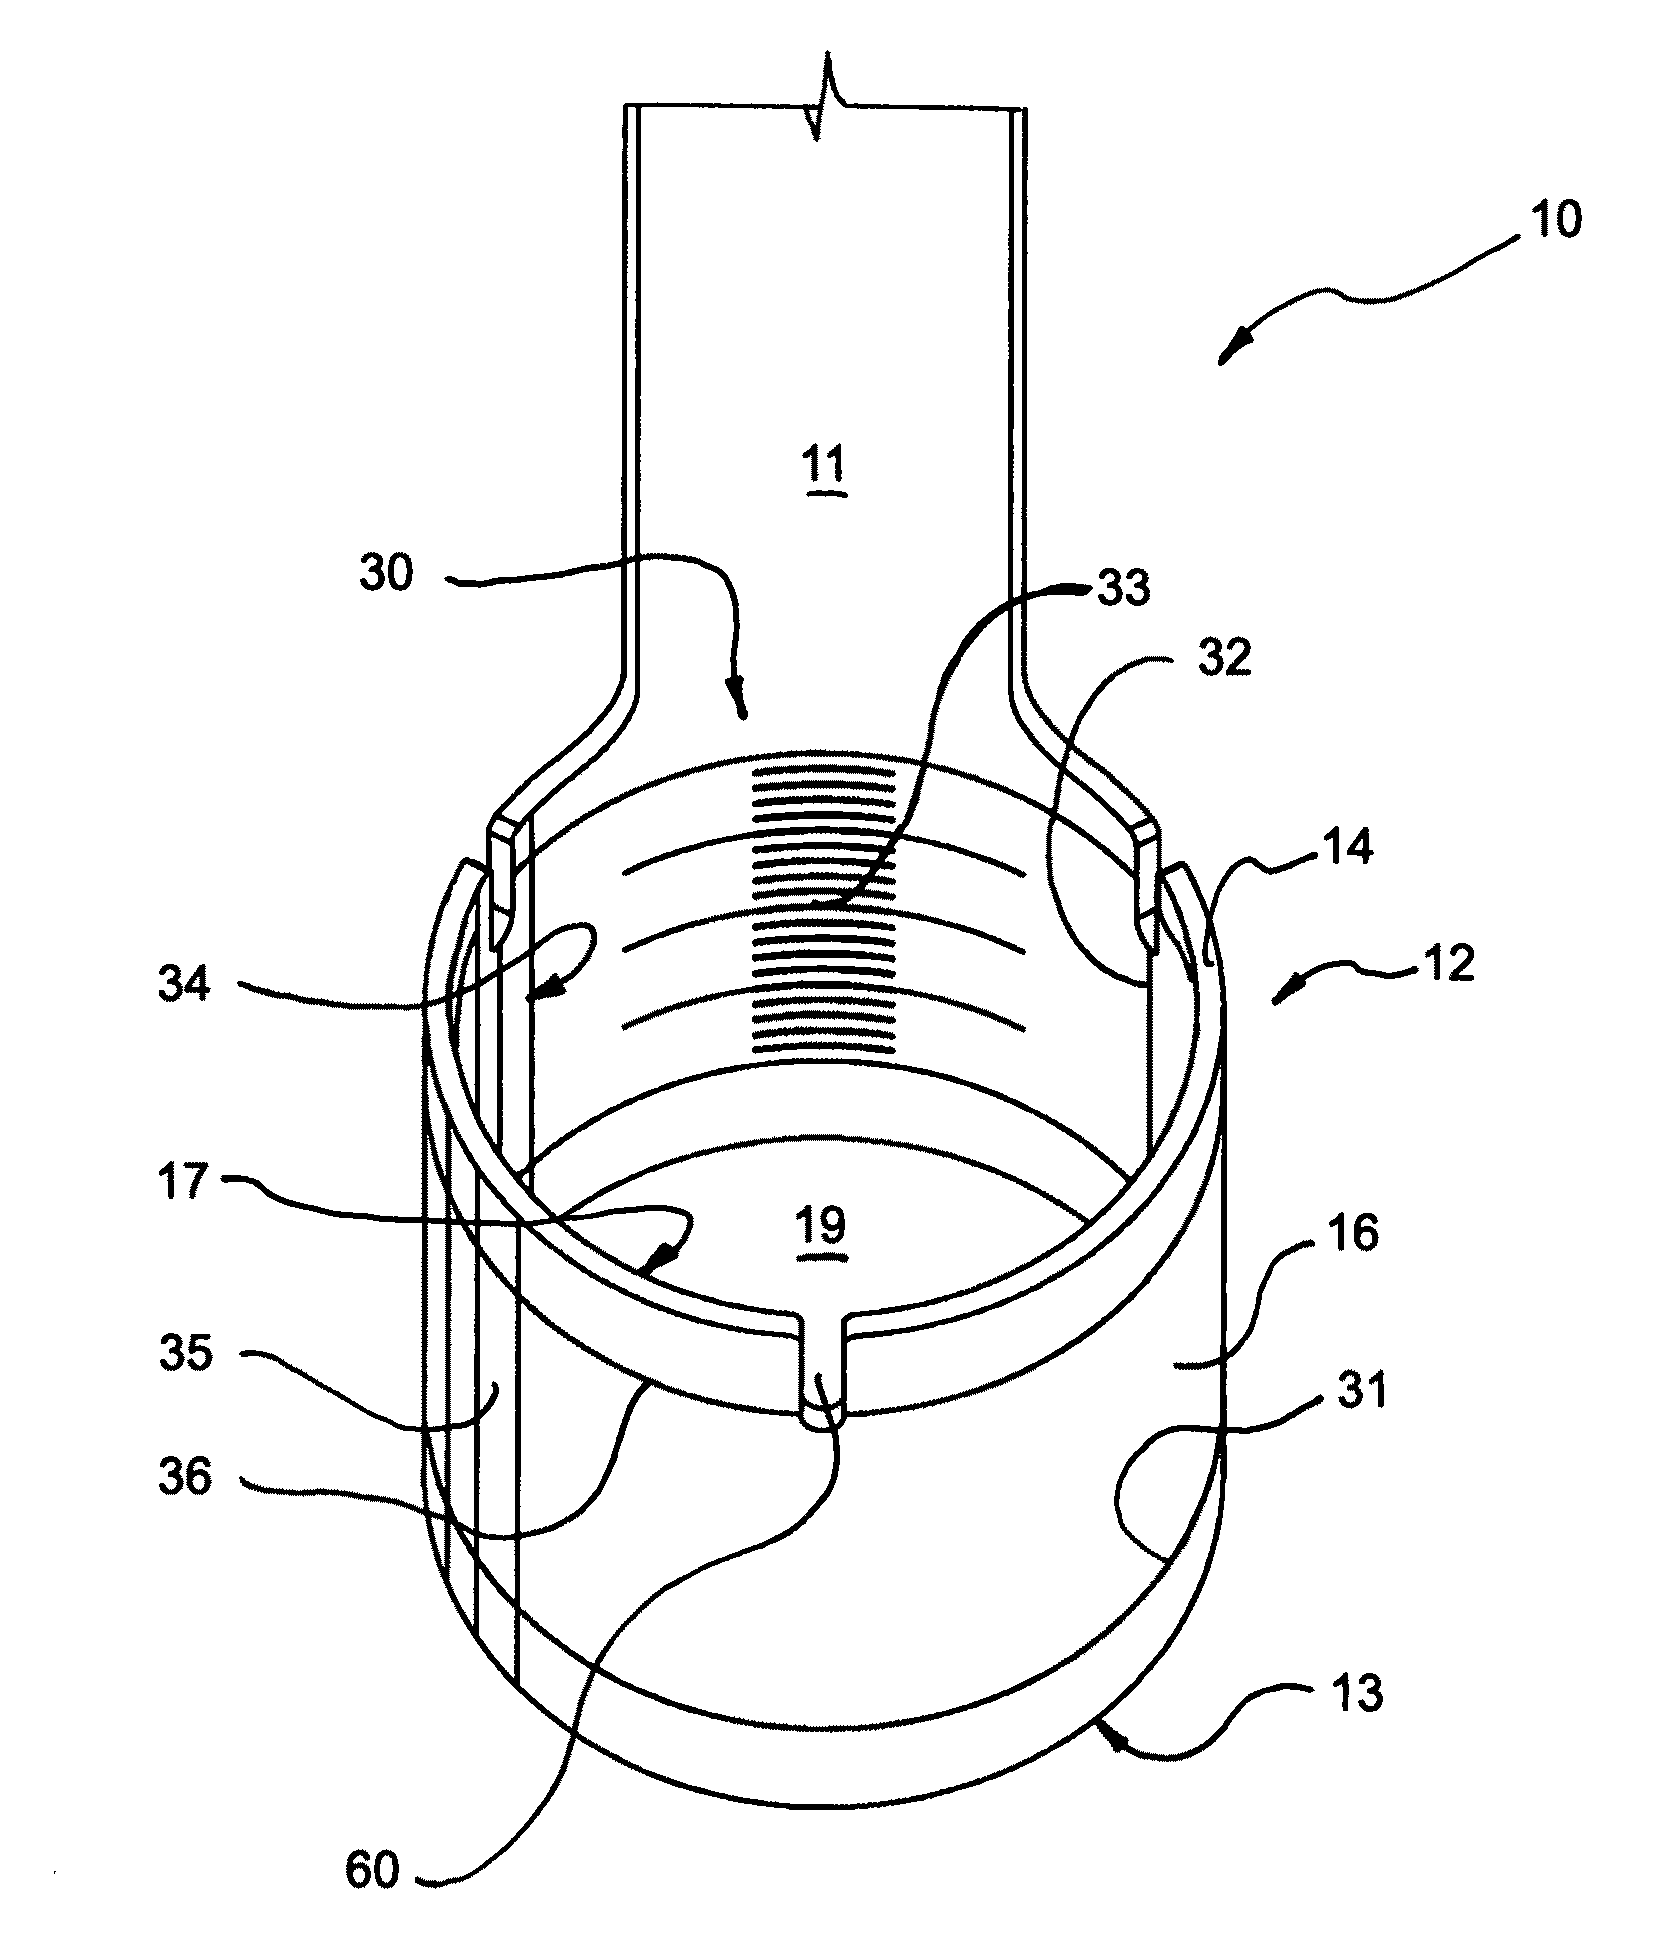 Surgical tool for measurement of valve annulus and cusp geometry